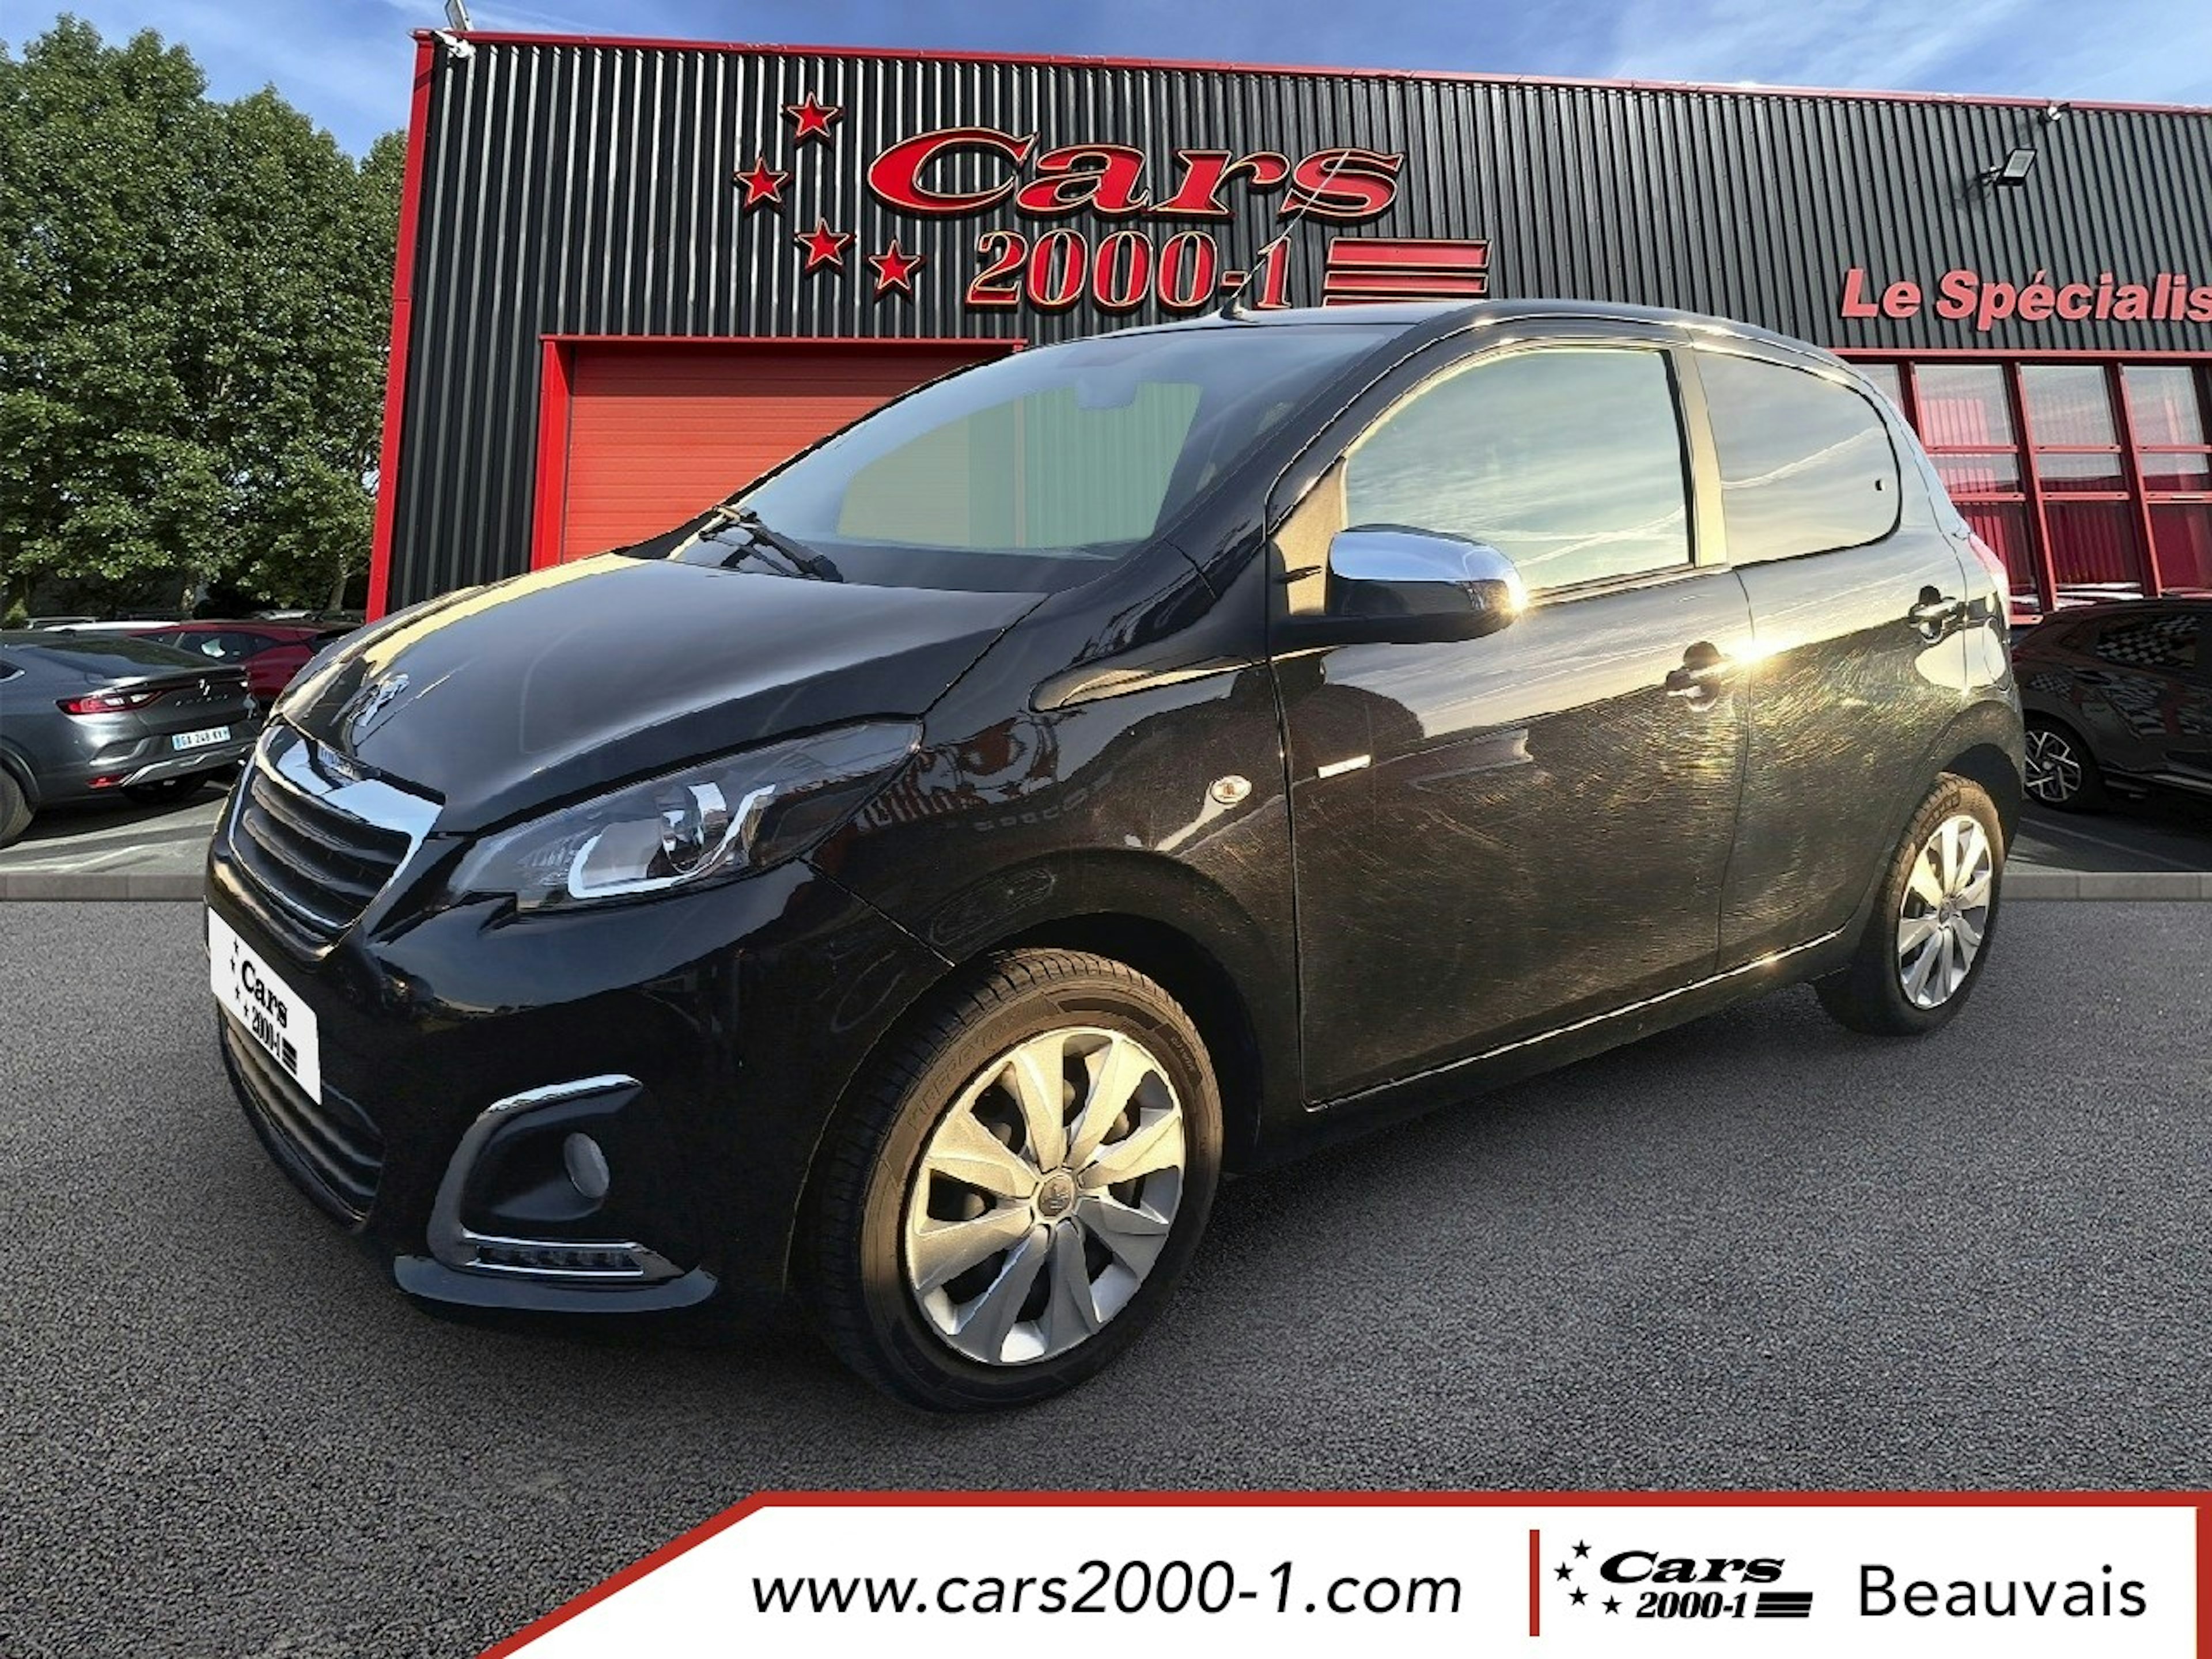 Peugeot 108 VTi 72ch S&S BVM5 Style occasion